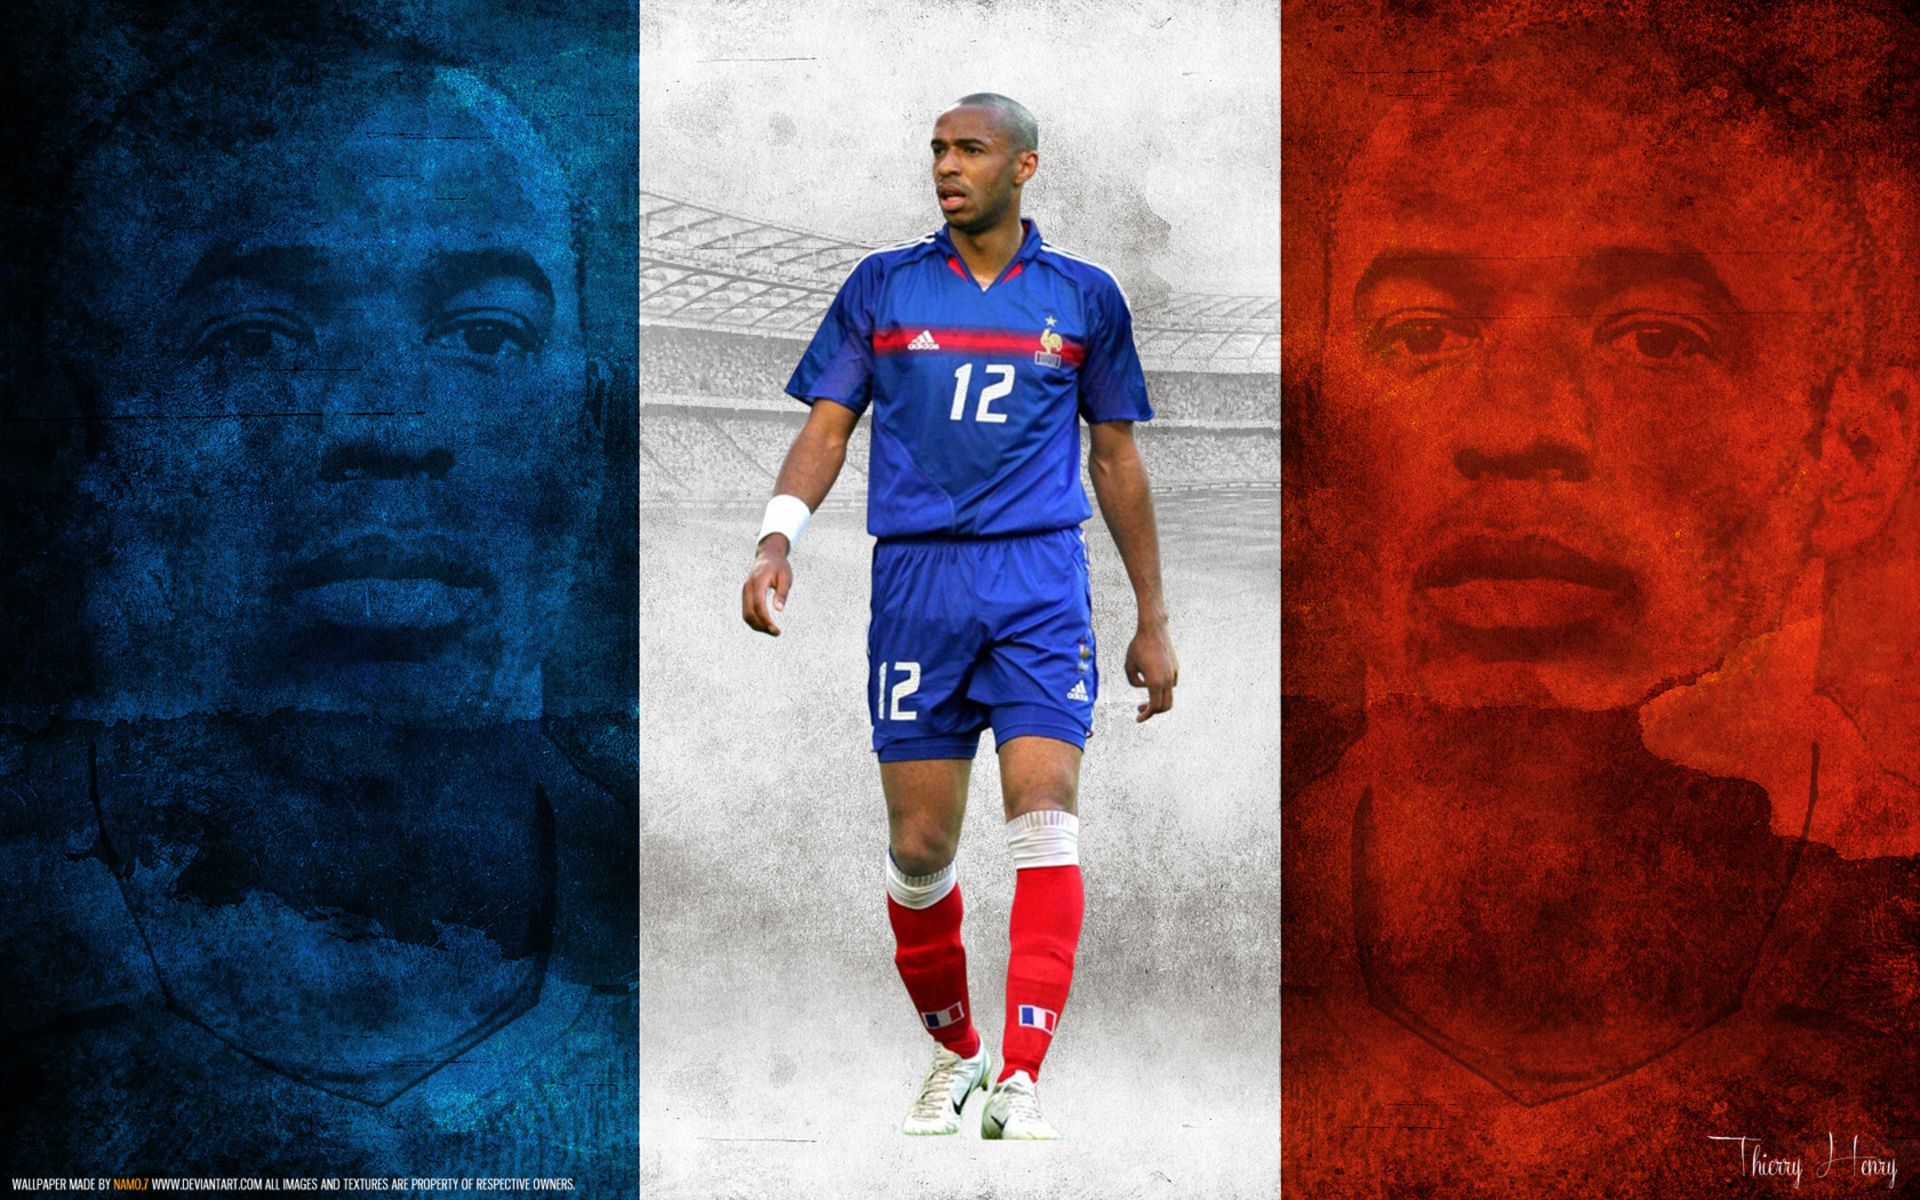 thierry henry, sports, france national football team, soccer